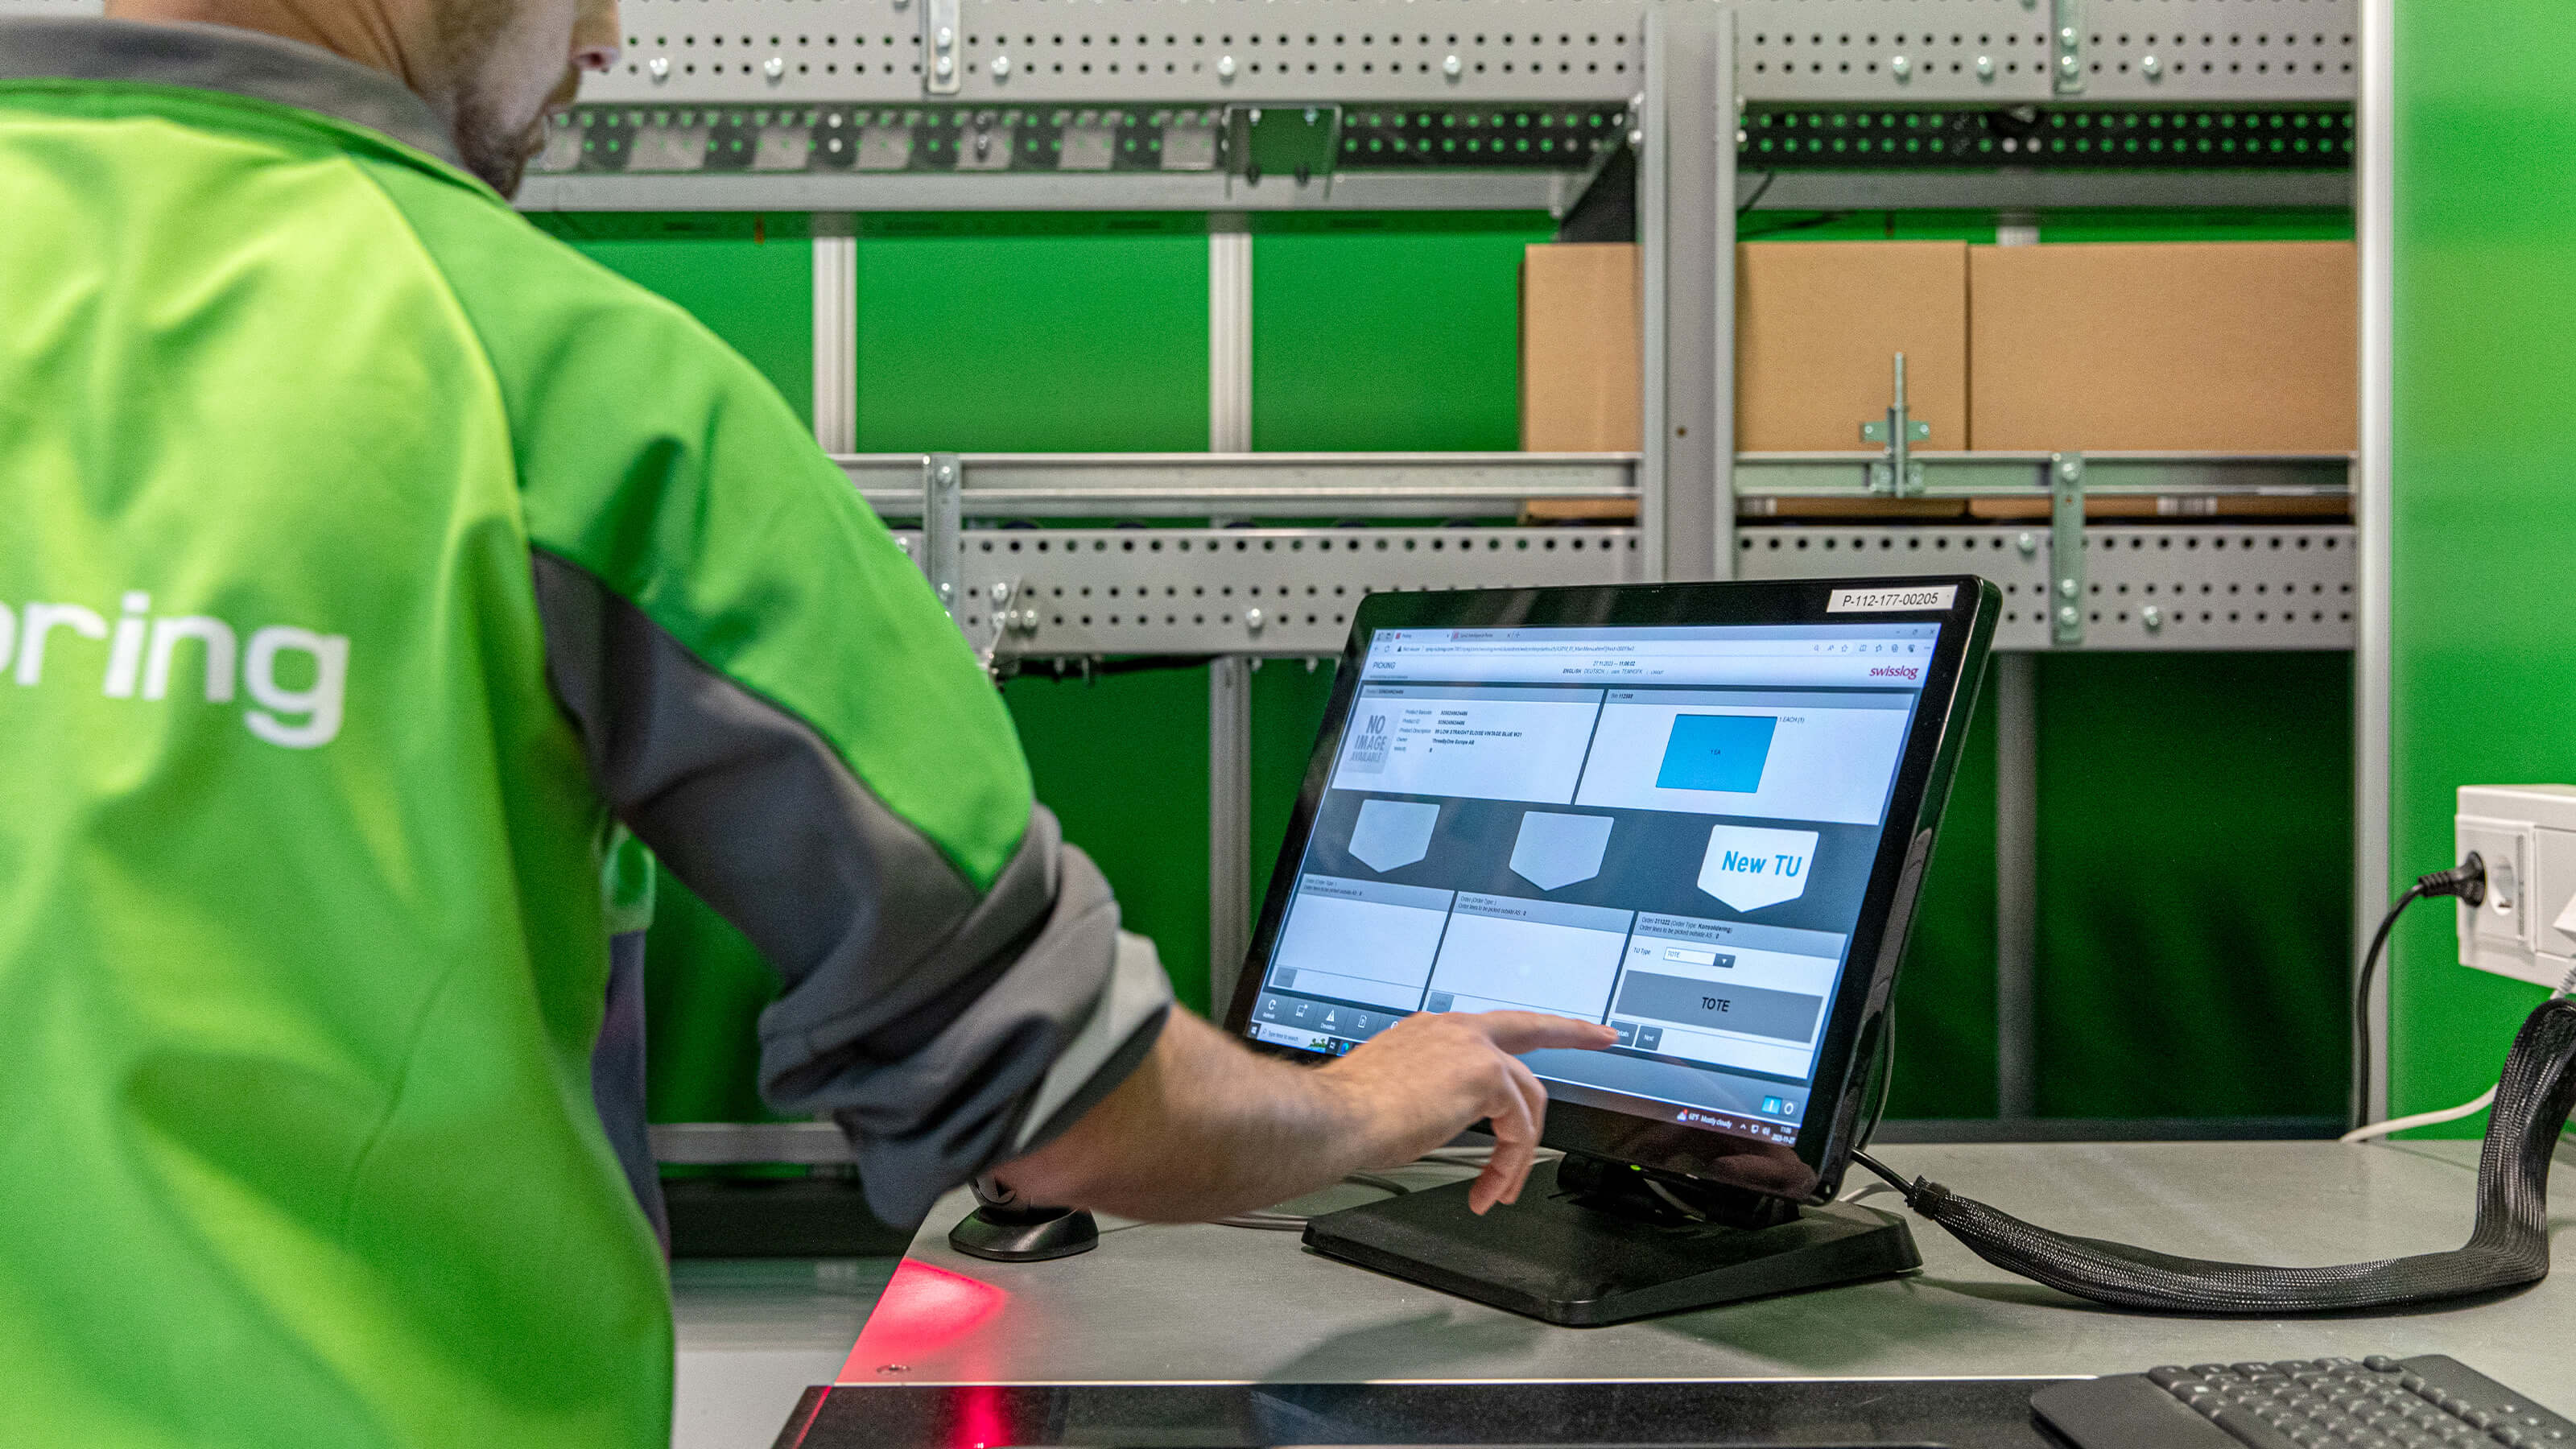 Swisslog's SynQ software in one of Bring's warehouses